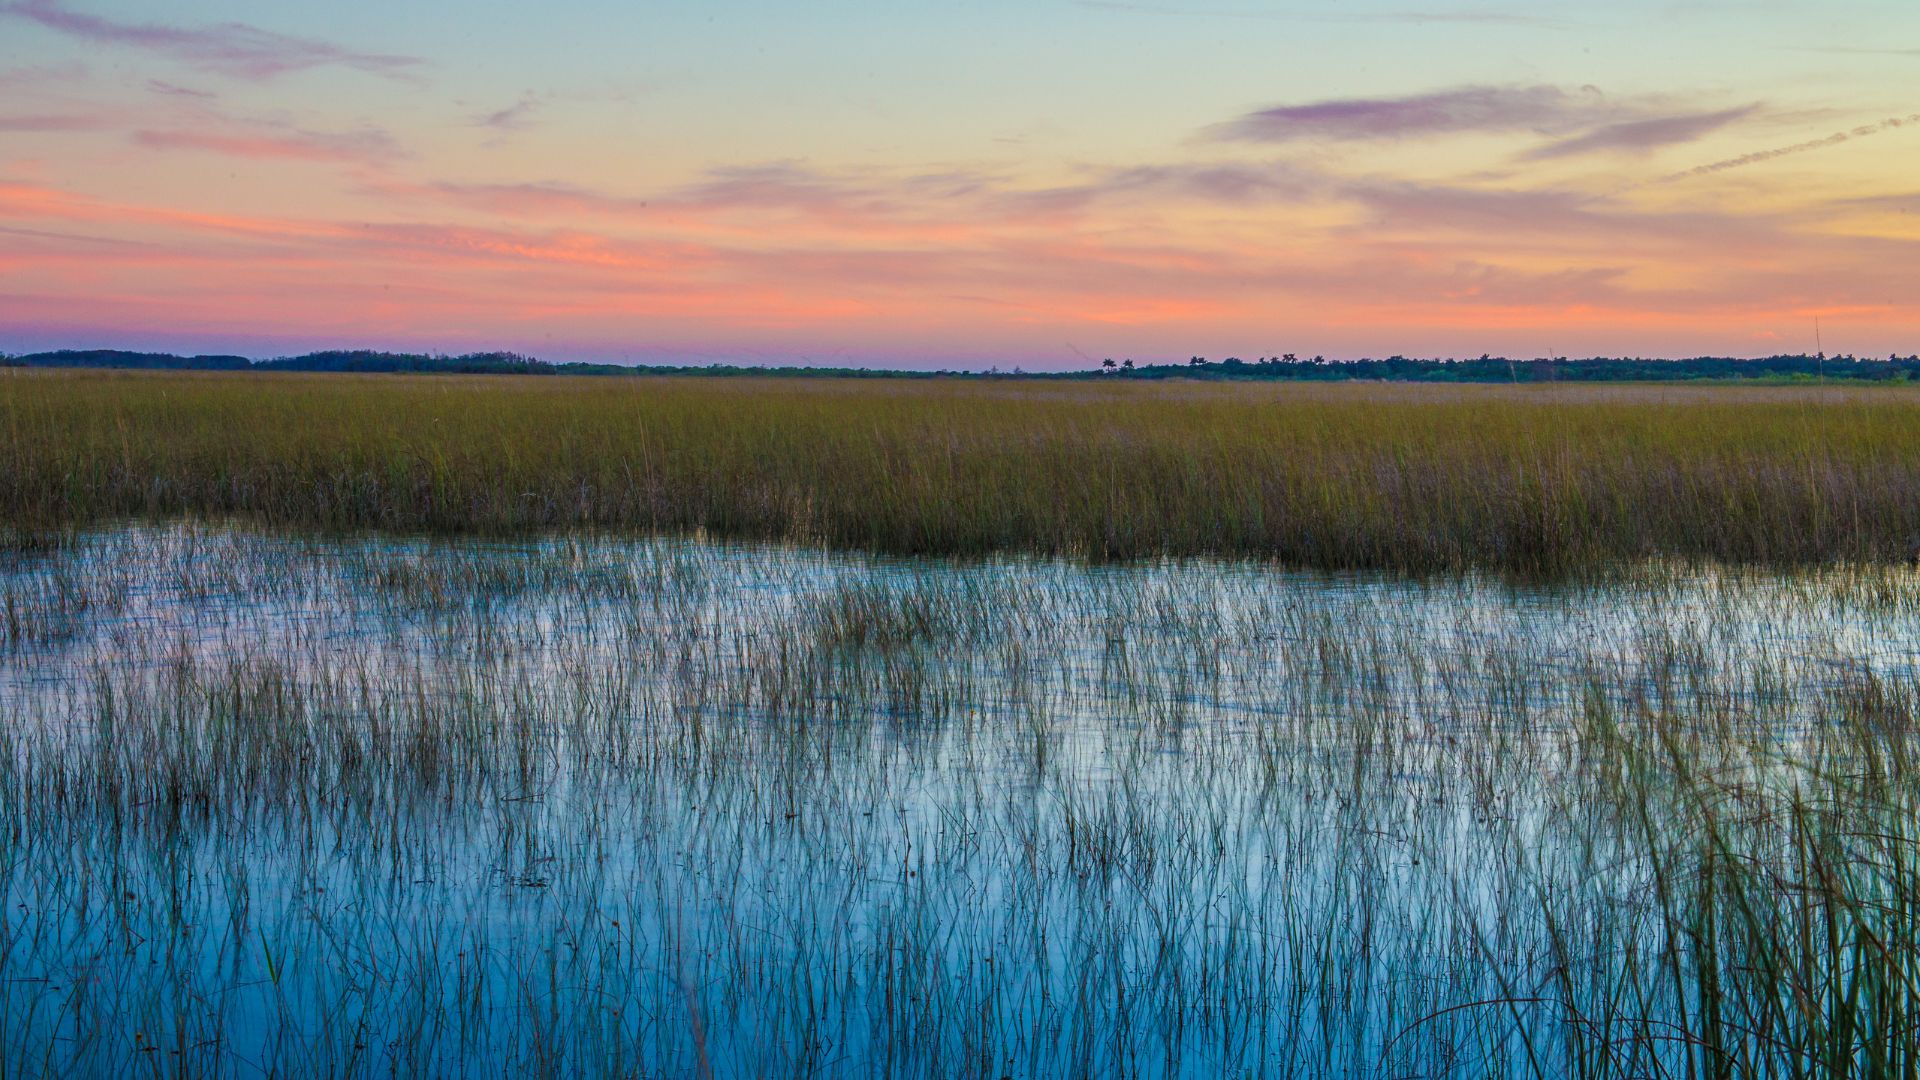 Marsh at sunset. Sky appears in bands of pink, blue, and purple. Green marsh grass in the middle, and blue water at the bottom, with reflections of marsh grass.